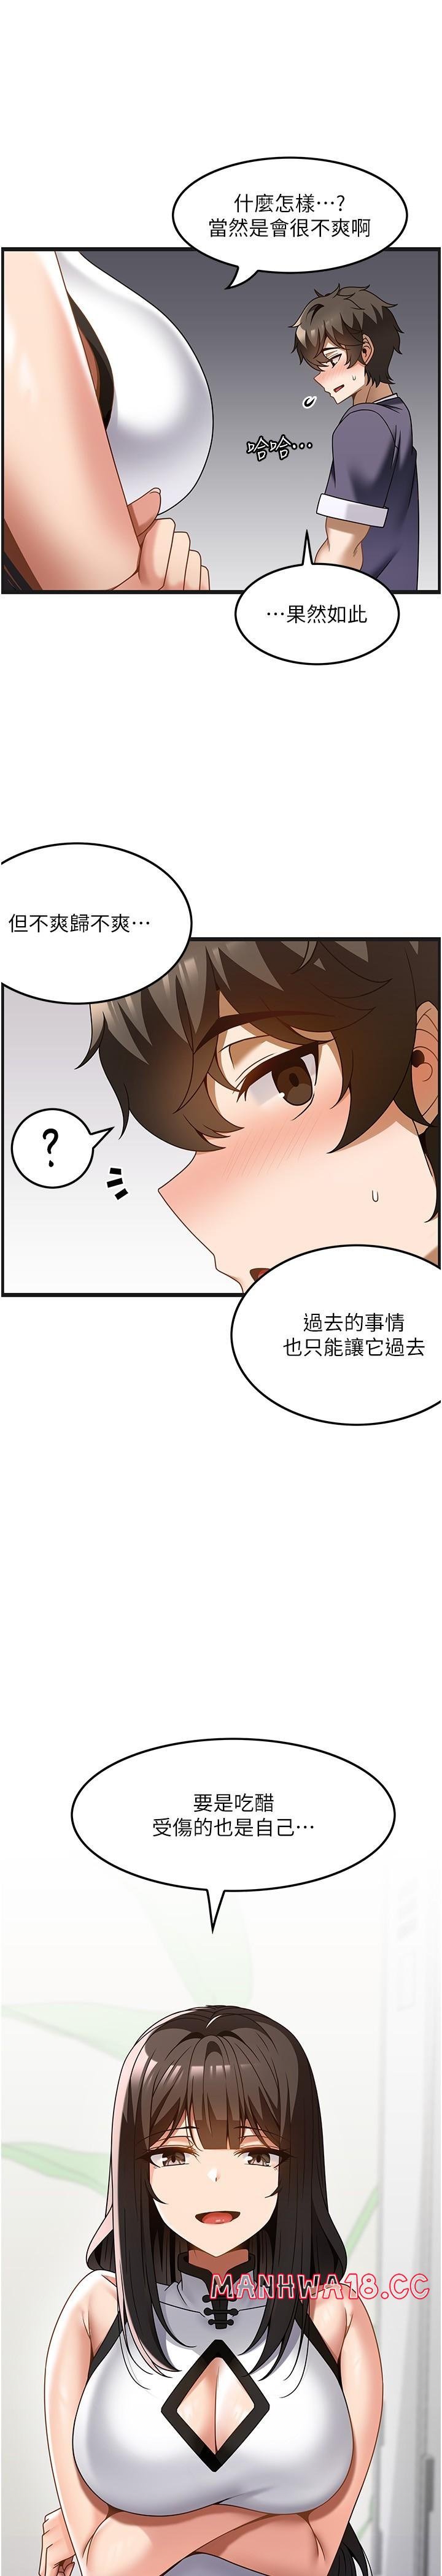 too-good-at-massages-raw-chap-34-11